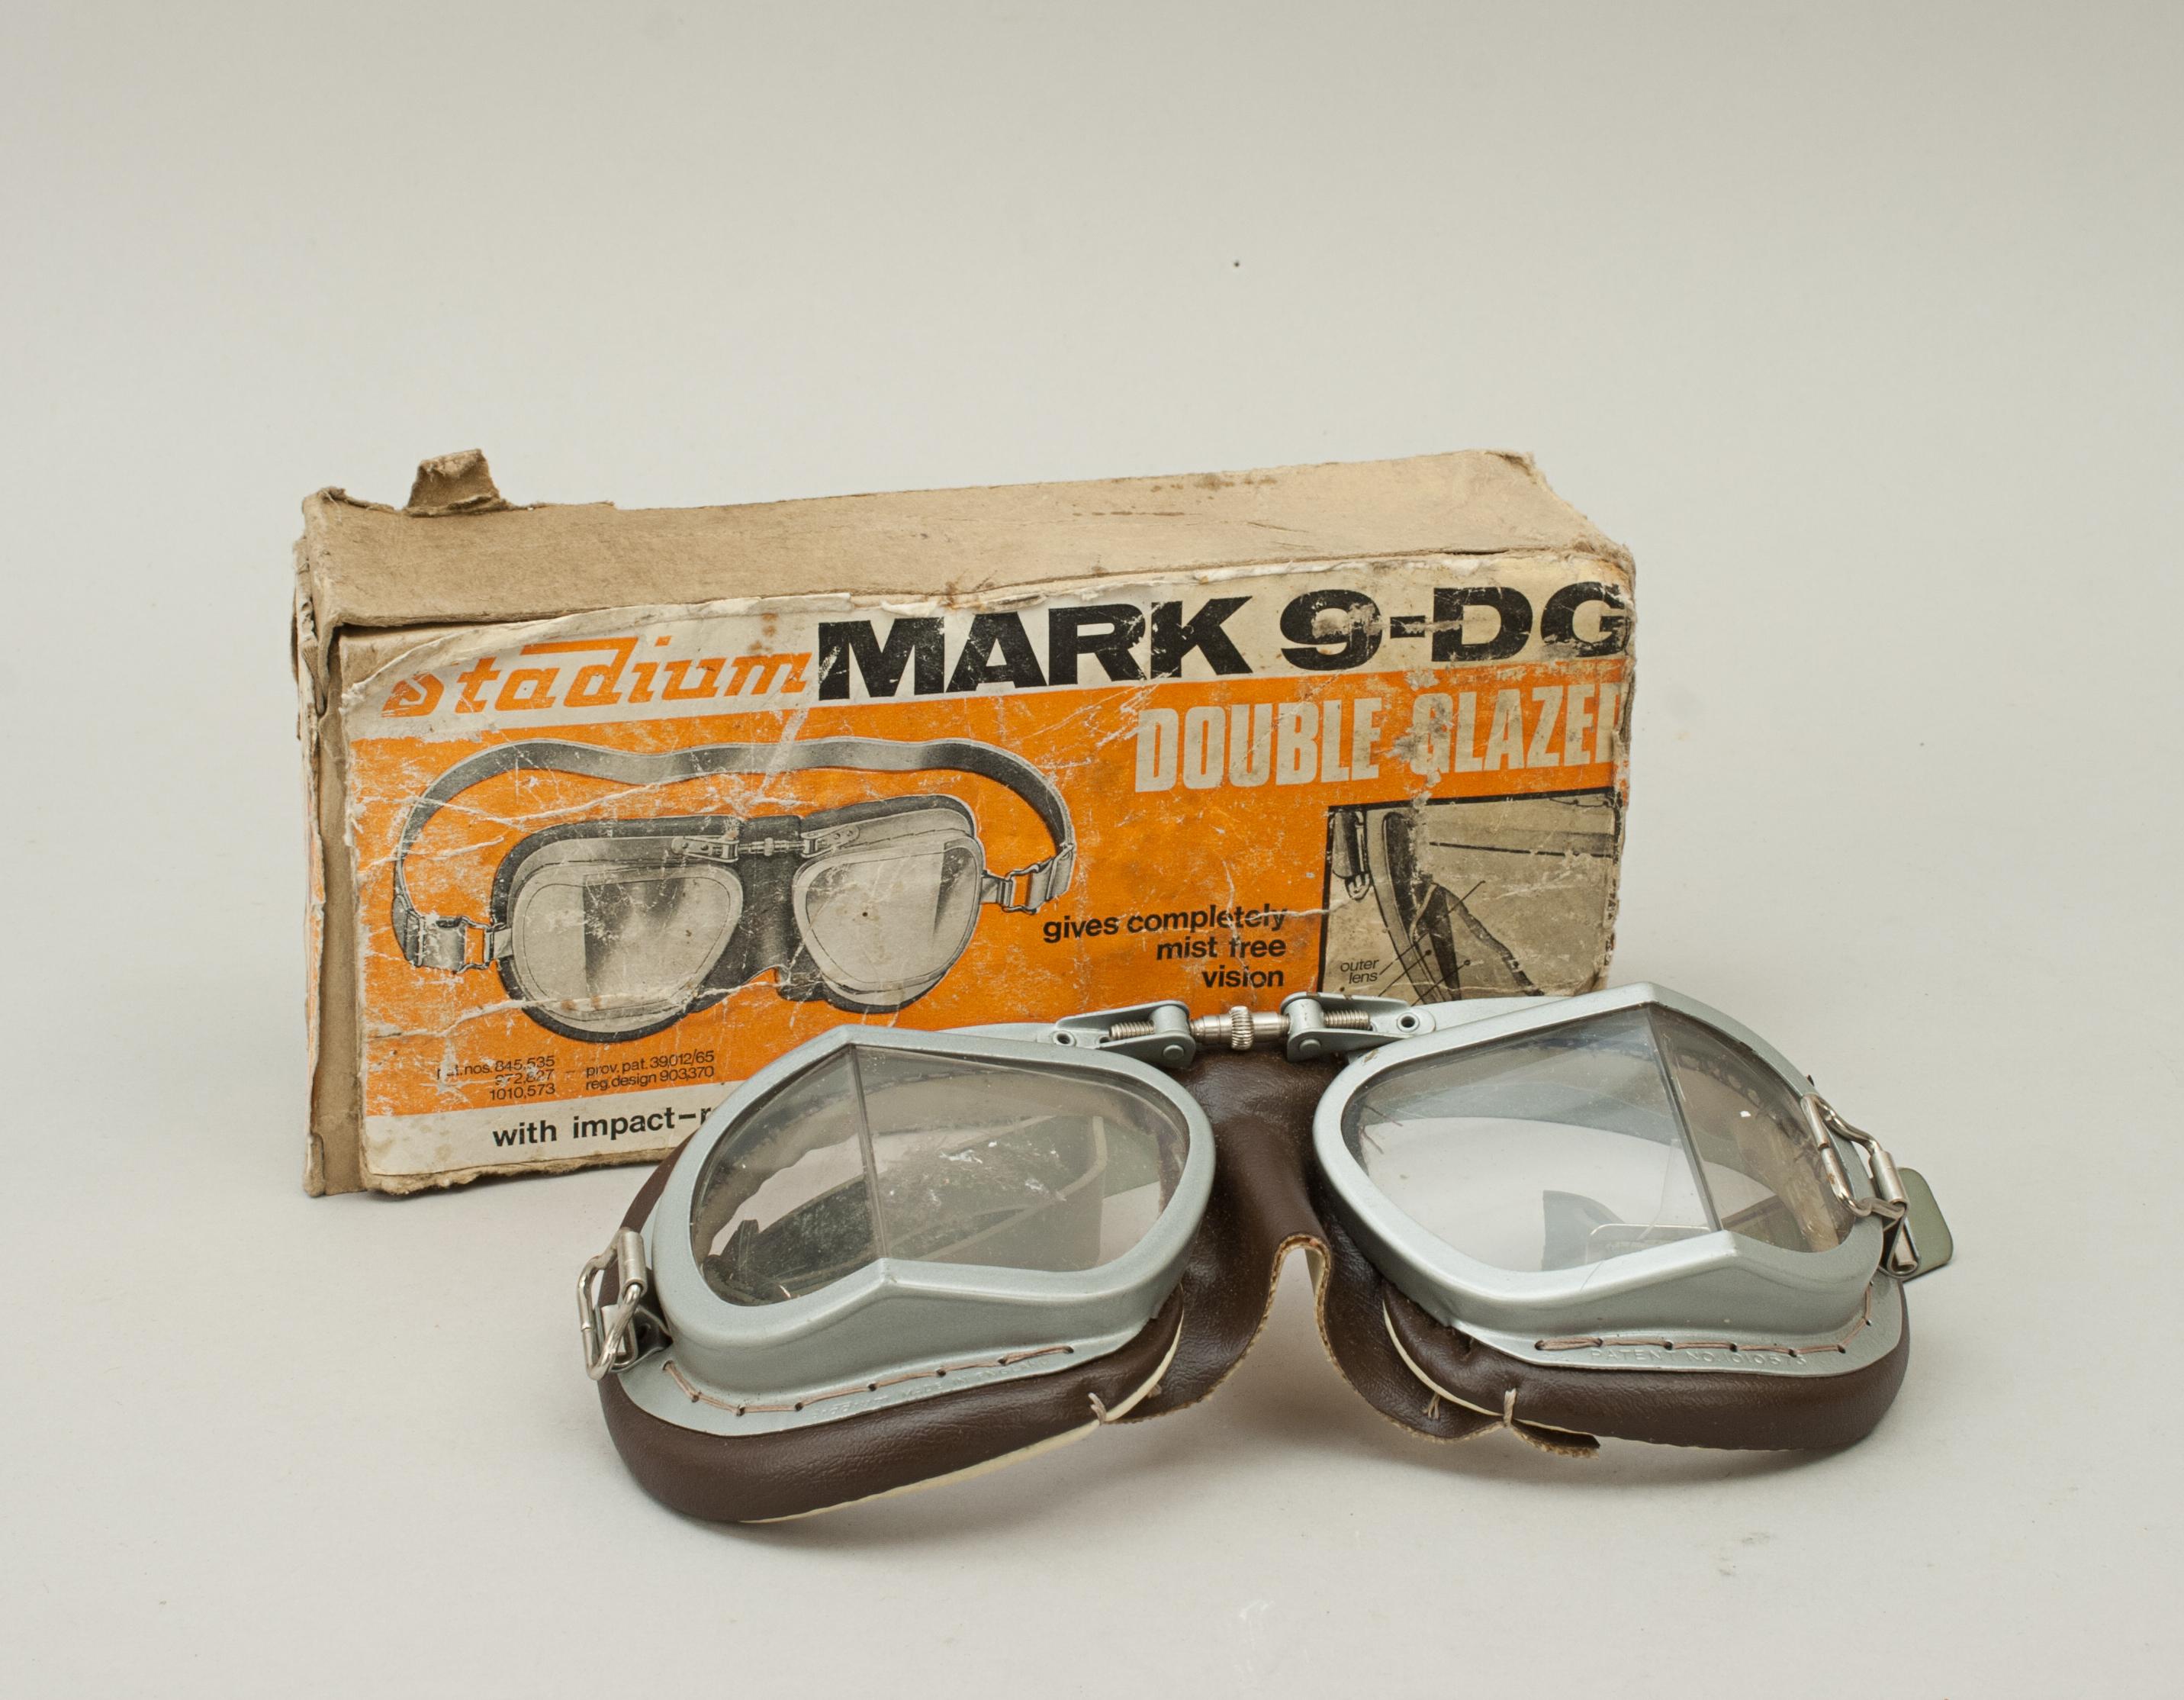 Double glazed 'Stadium' Mark 9-DG Goggles.
A good pair of Stadium Motoring or Motorcycle goggles in the original Stadium cardboard box. The goggles in good condition with padded soft synthetic leather facemask and adjustable brow-bridge. The silver